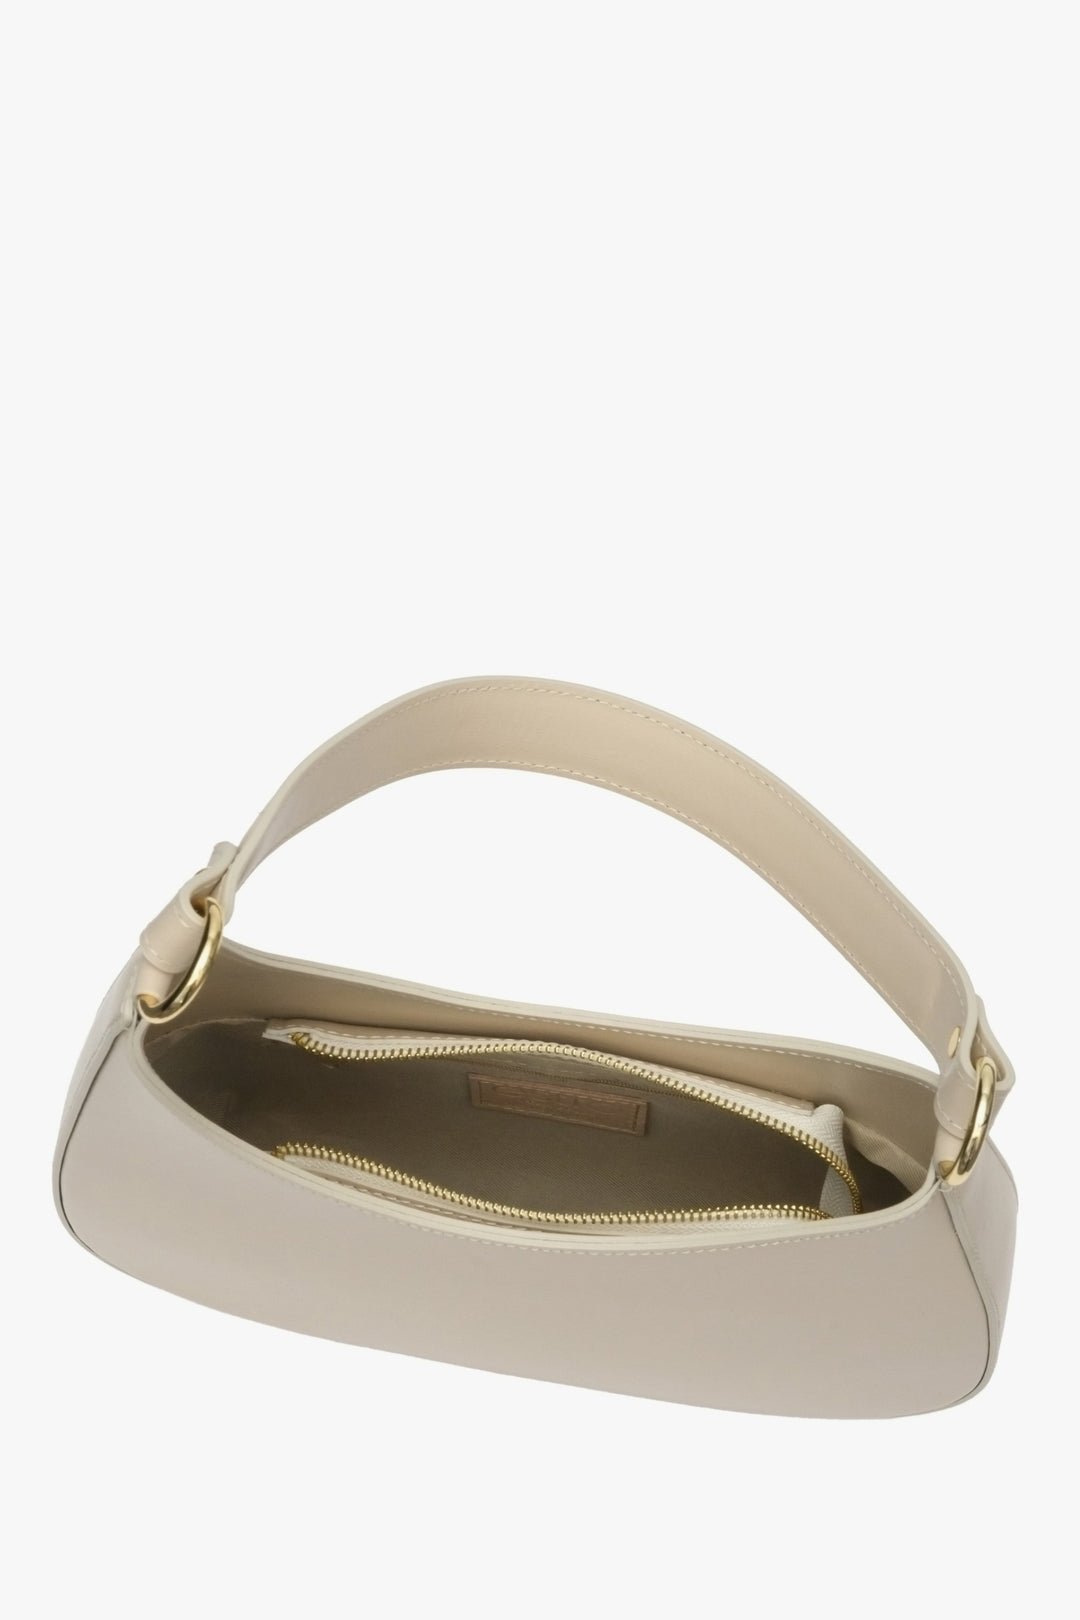 Women's shoulder bag in sand beige in Italian natural leather - close-up of the interior of the model.